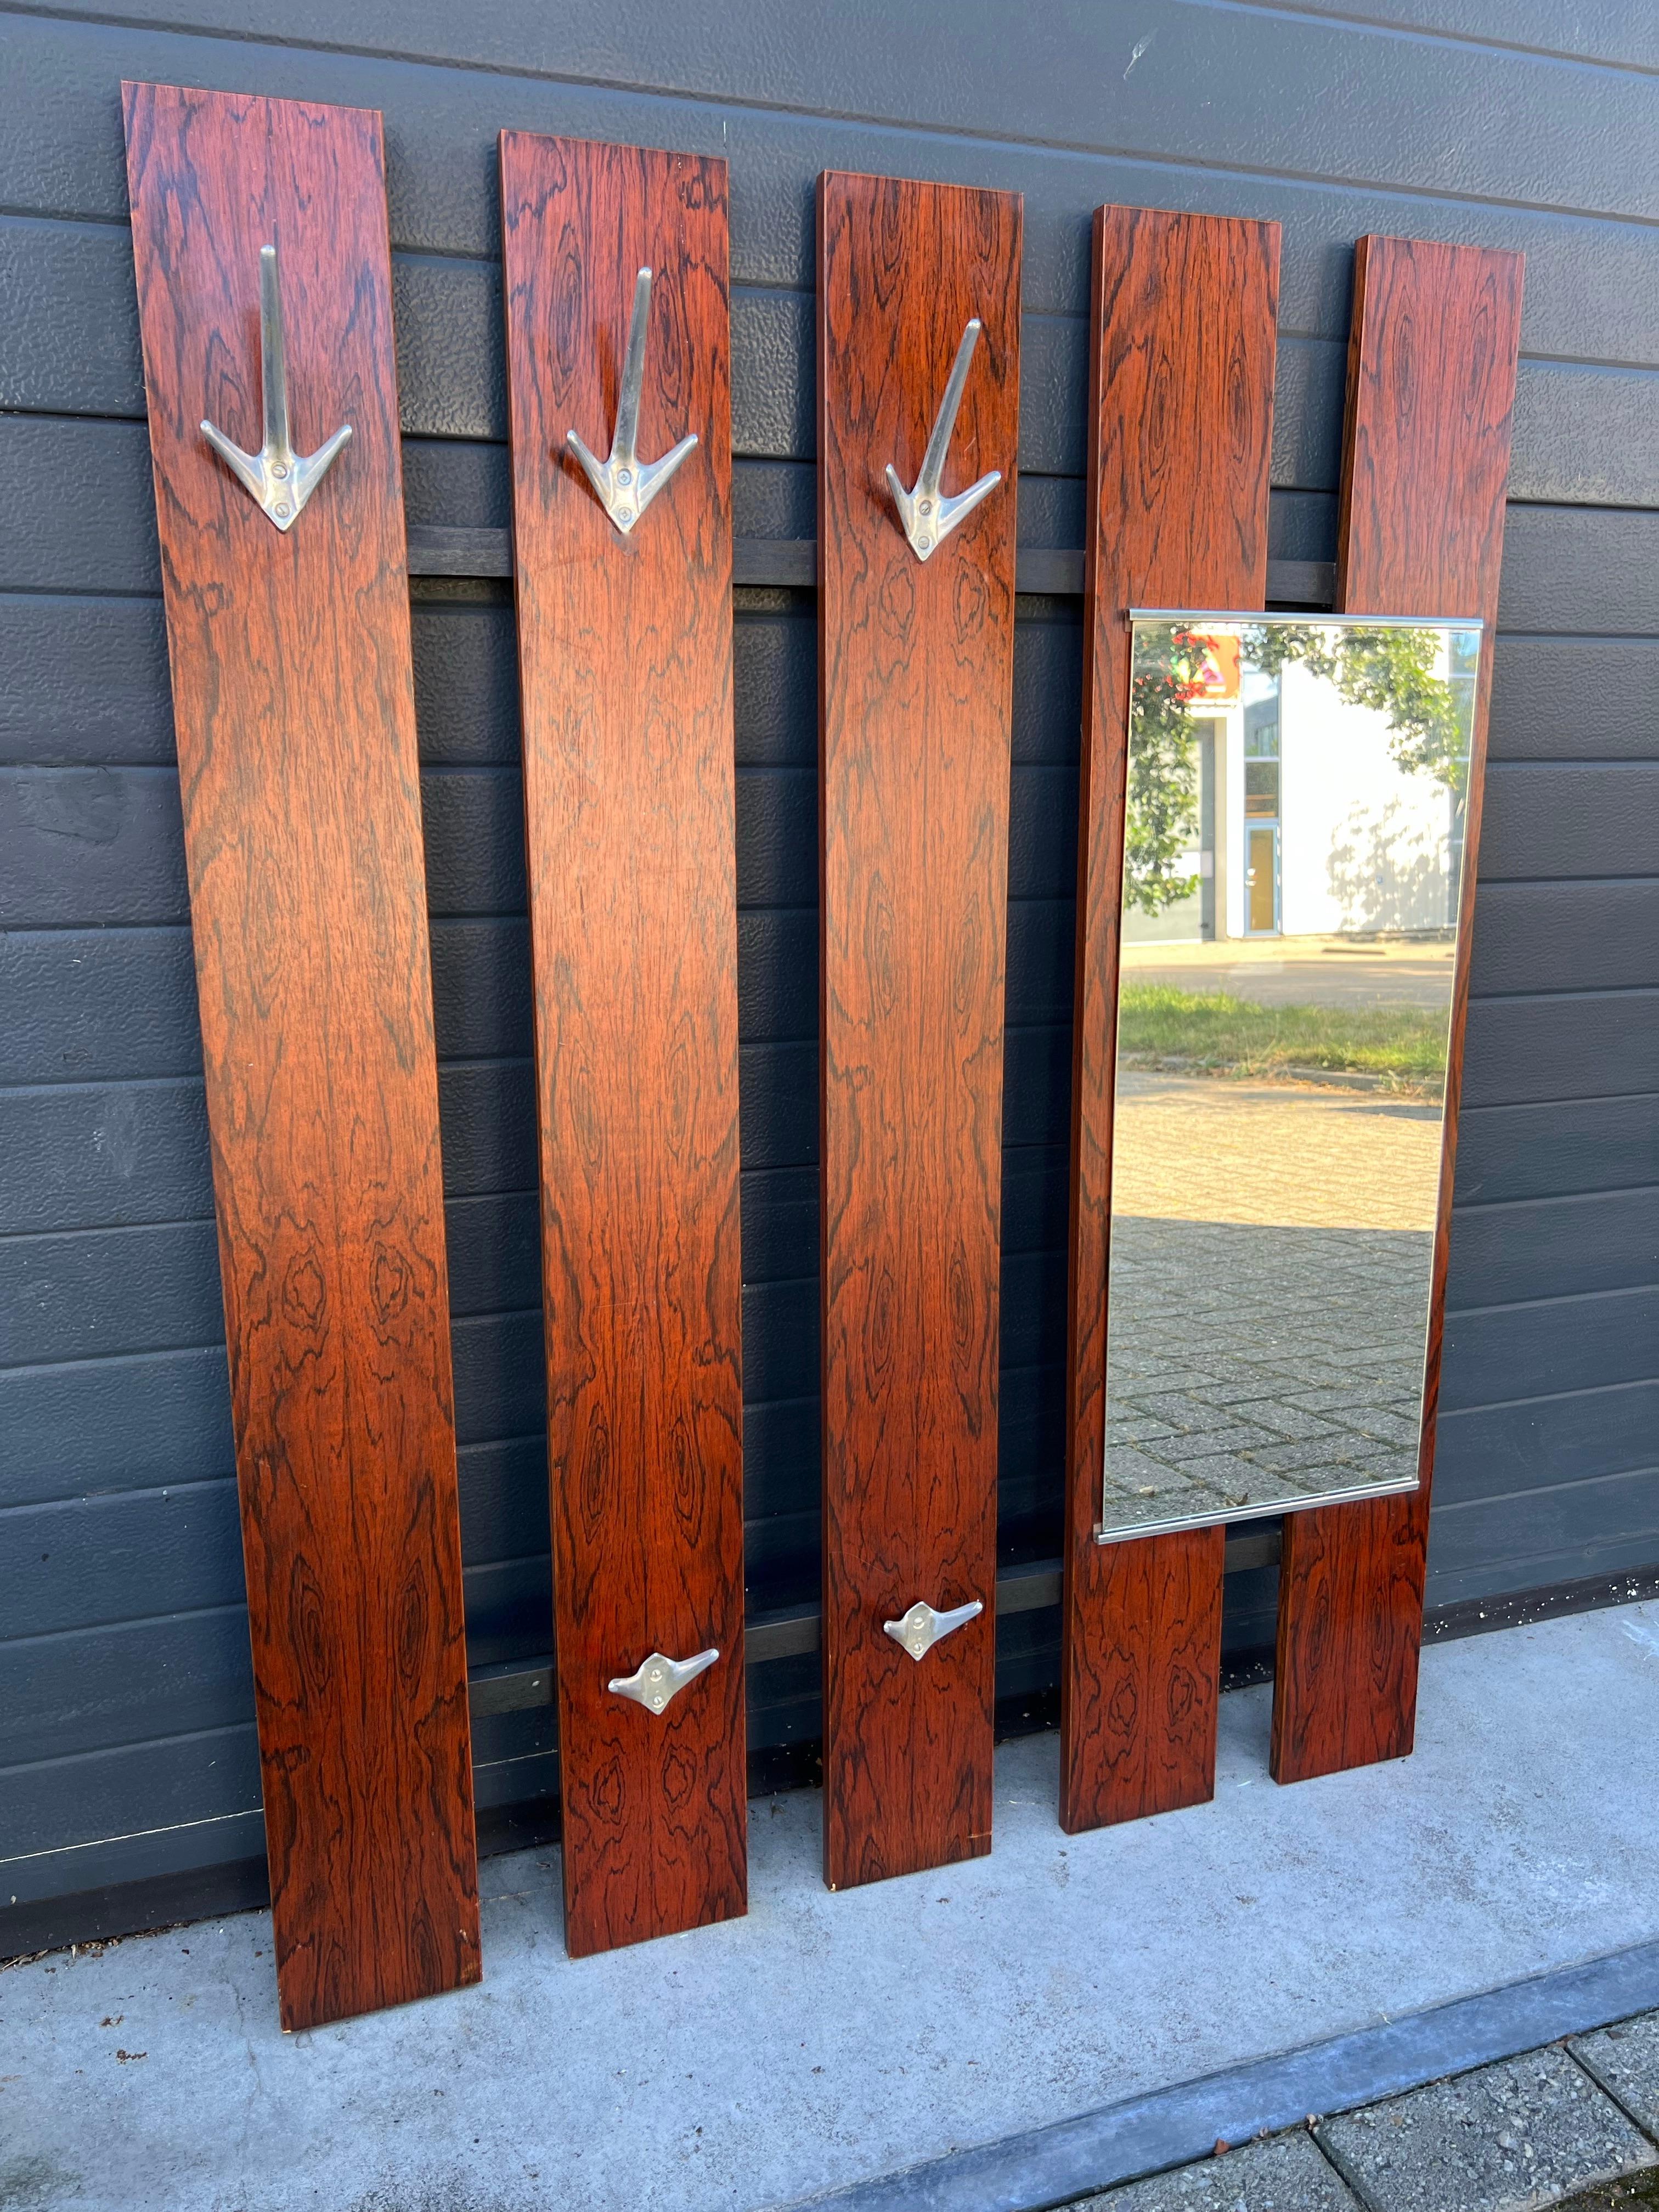 Stylish Mid-Century Modern coat-rack for wall mounting with rare and practical hooks.

This Midcentury, wooden wall coat-rack is in very good condition and we think it is an interior decorater's dream. Its design and light (or should we say fresh)